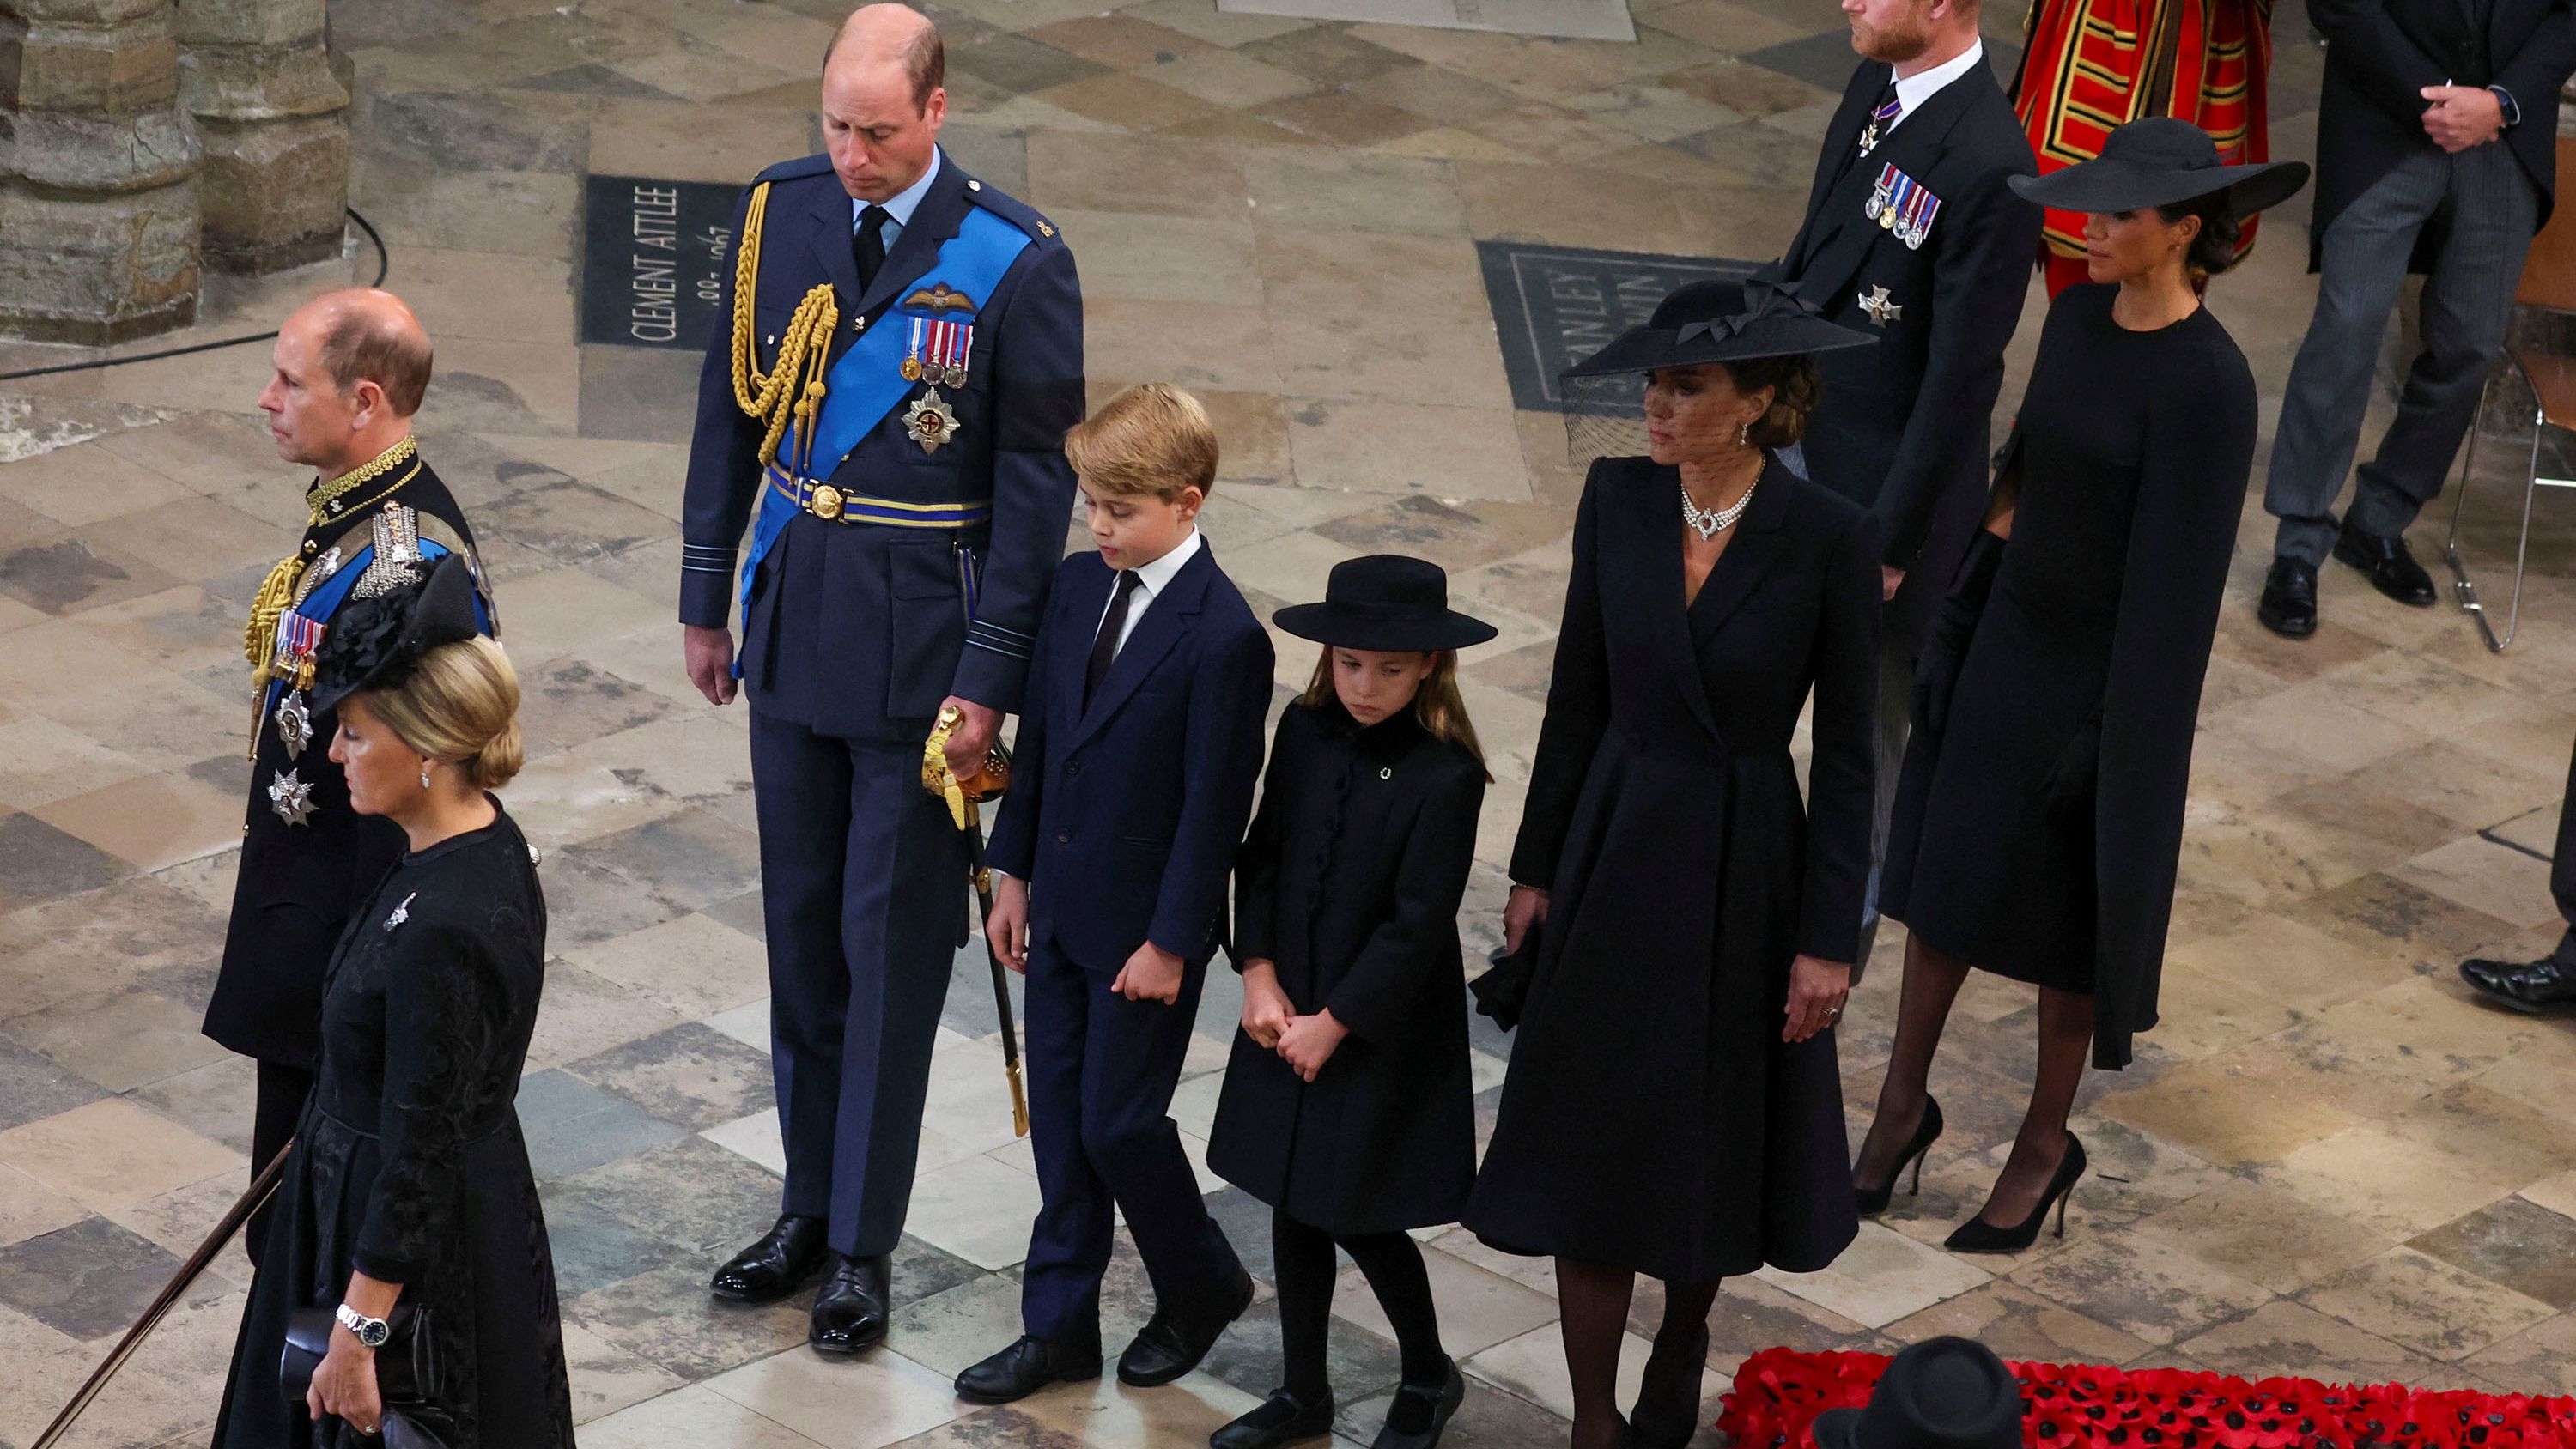 William and Catherine walk with Prince George and Princess Charlotte at the <a href="http://www.cnn.com/2022/09/19/uk/gallery/queen-elizabeth-ii-funeral/index.html" target="_blank">state funeral of Queen Elizabeth II</a> in September 2022.